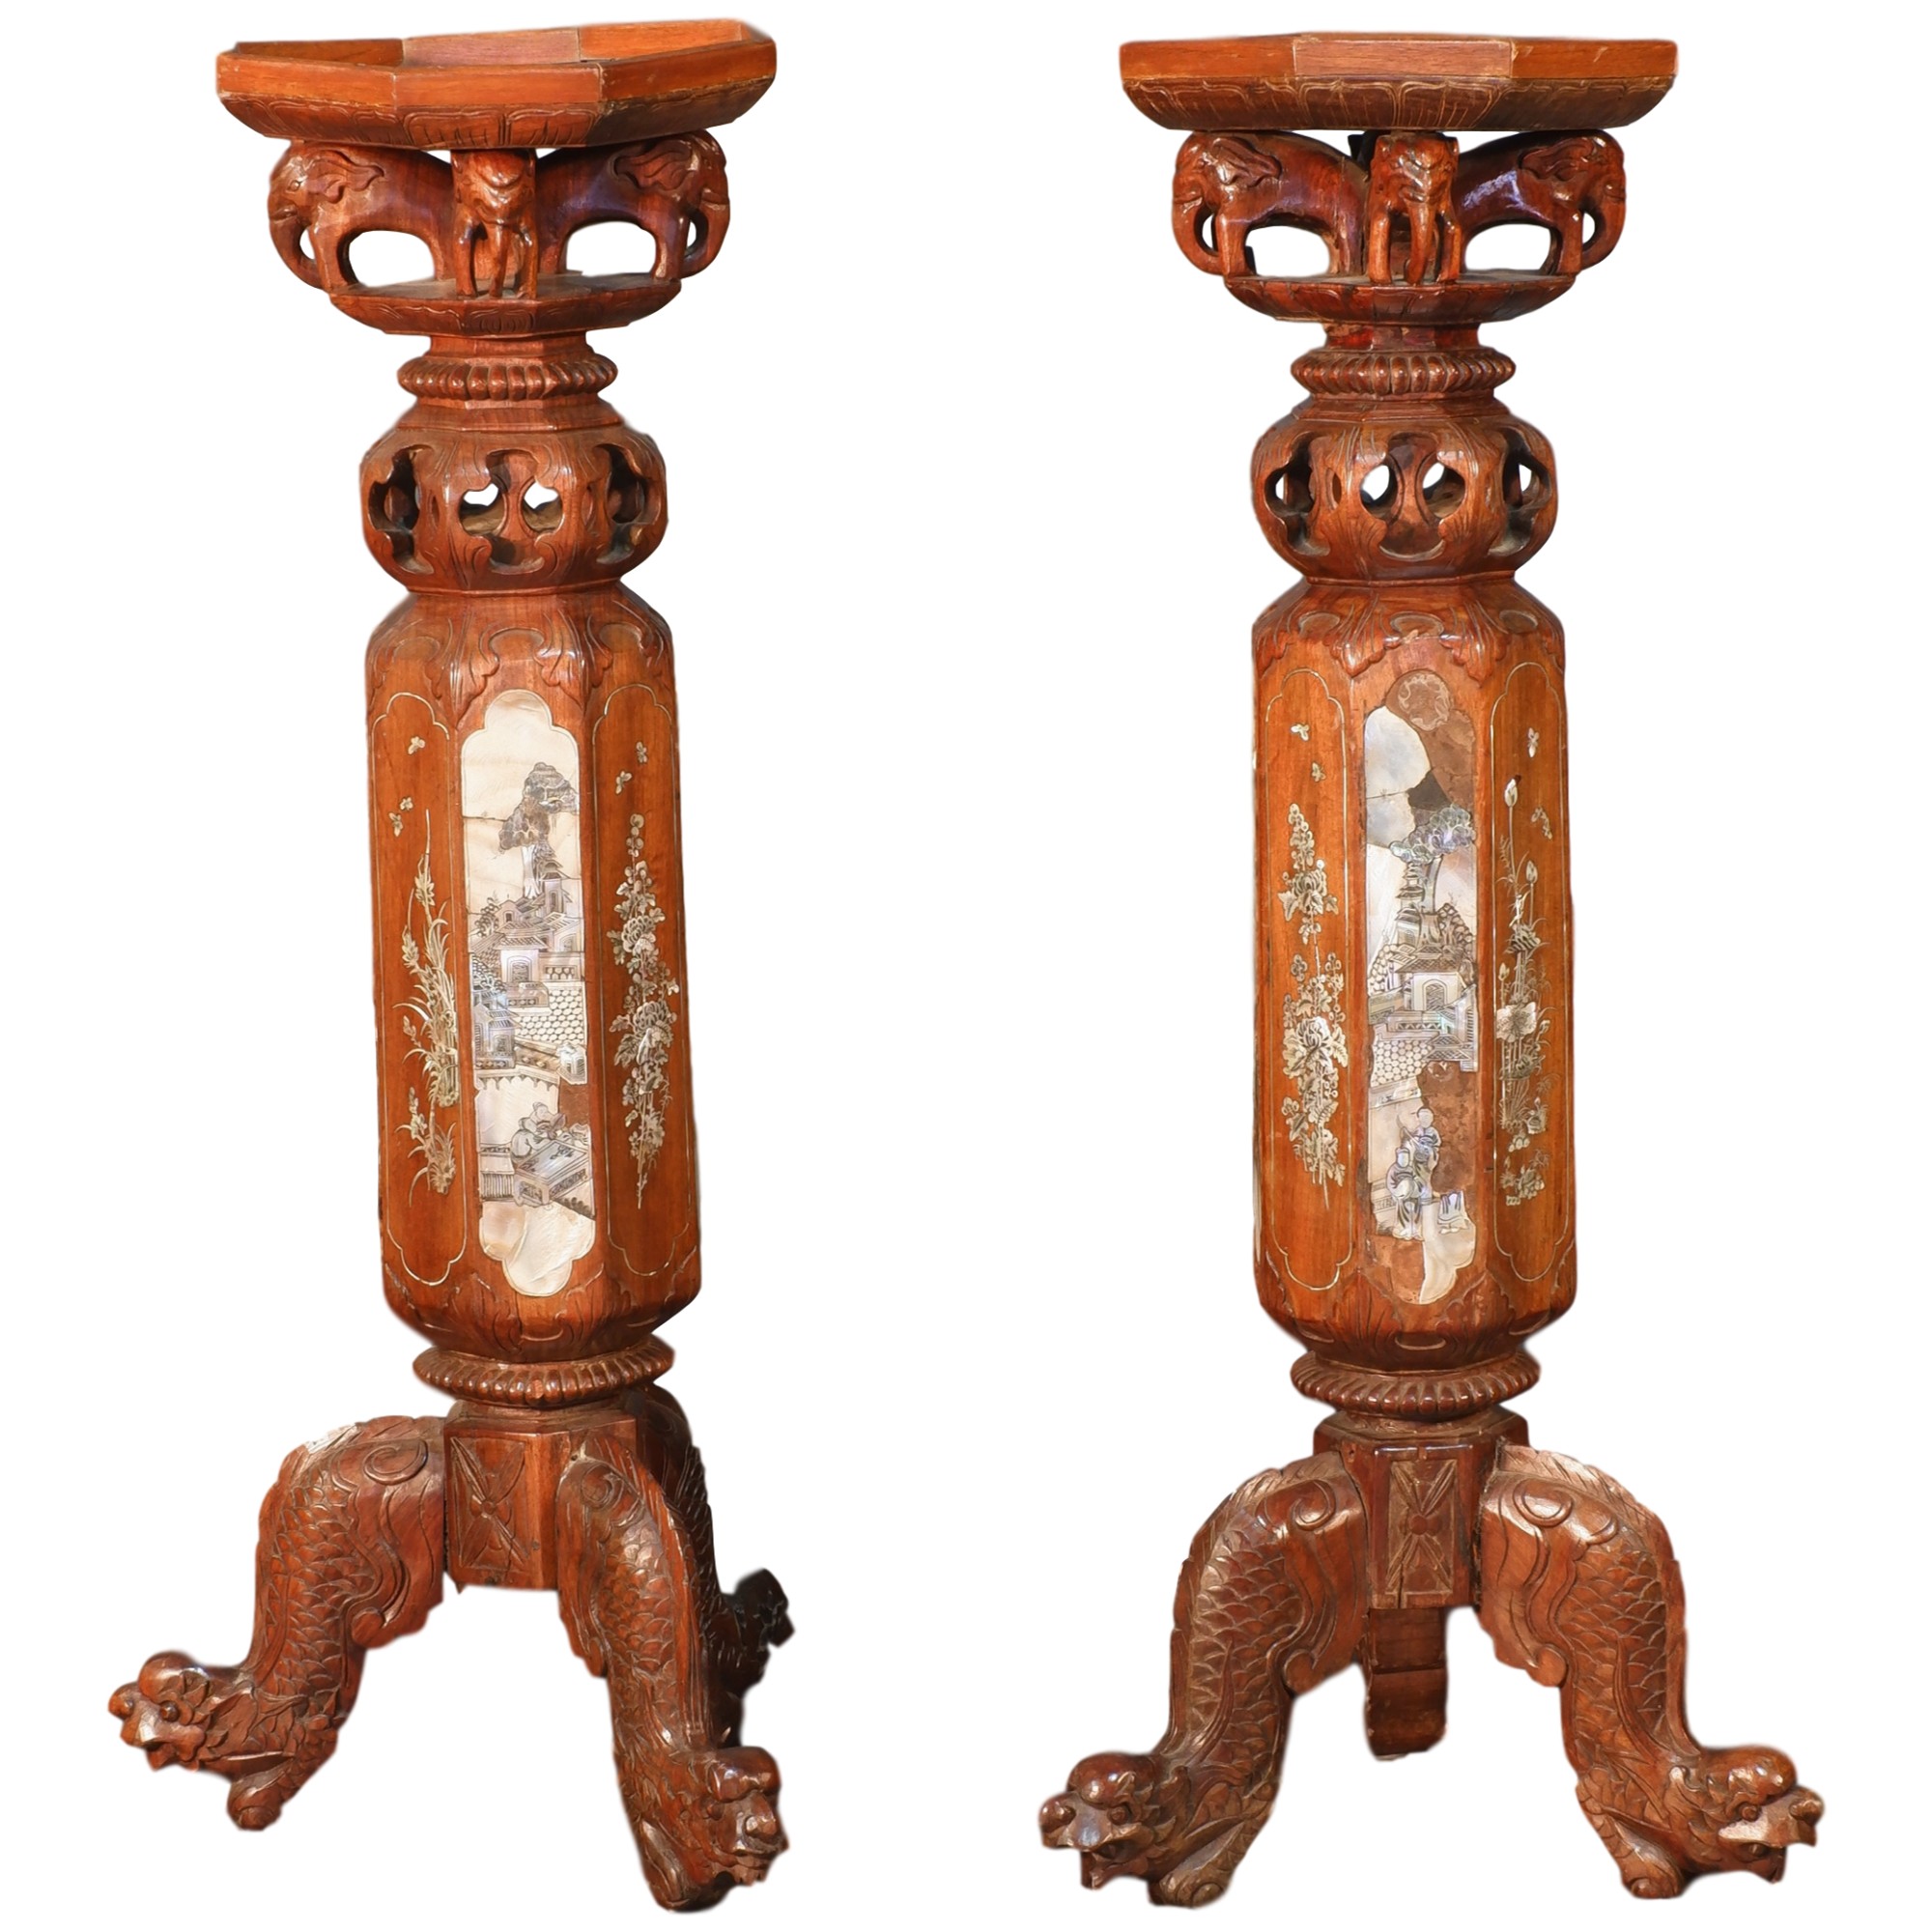 'Pair of Antique Chinese Carved Rosewood and Pearl Shell Inlaid Incense Stands'